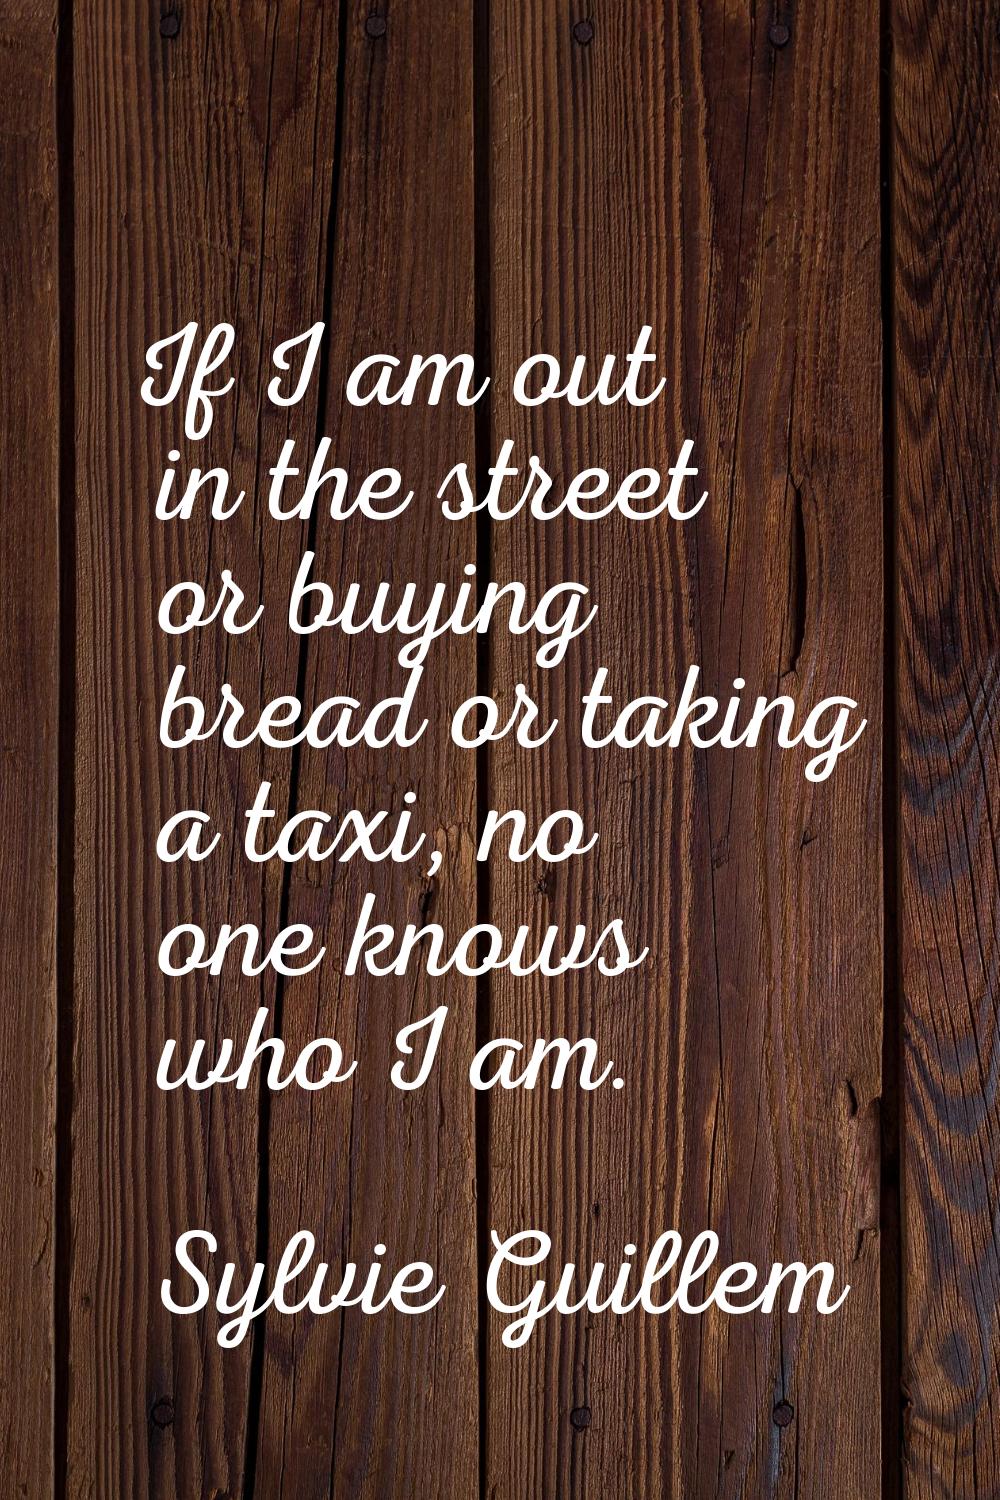 If I am out in the street or buying bread or taking a taxi, no one knows who I am.